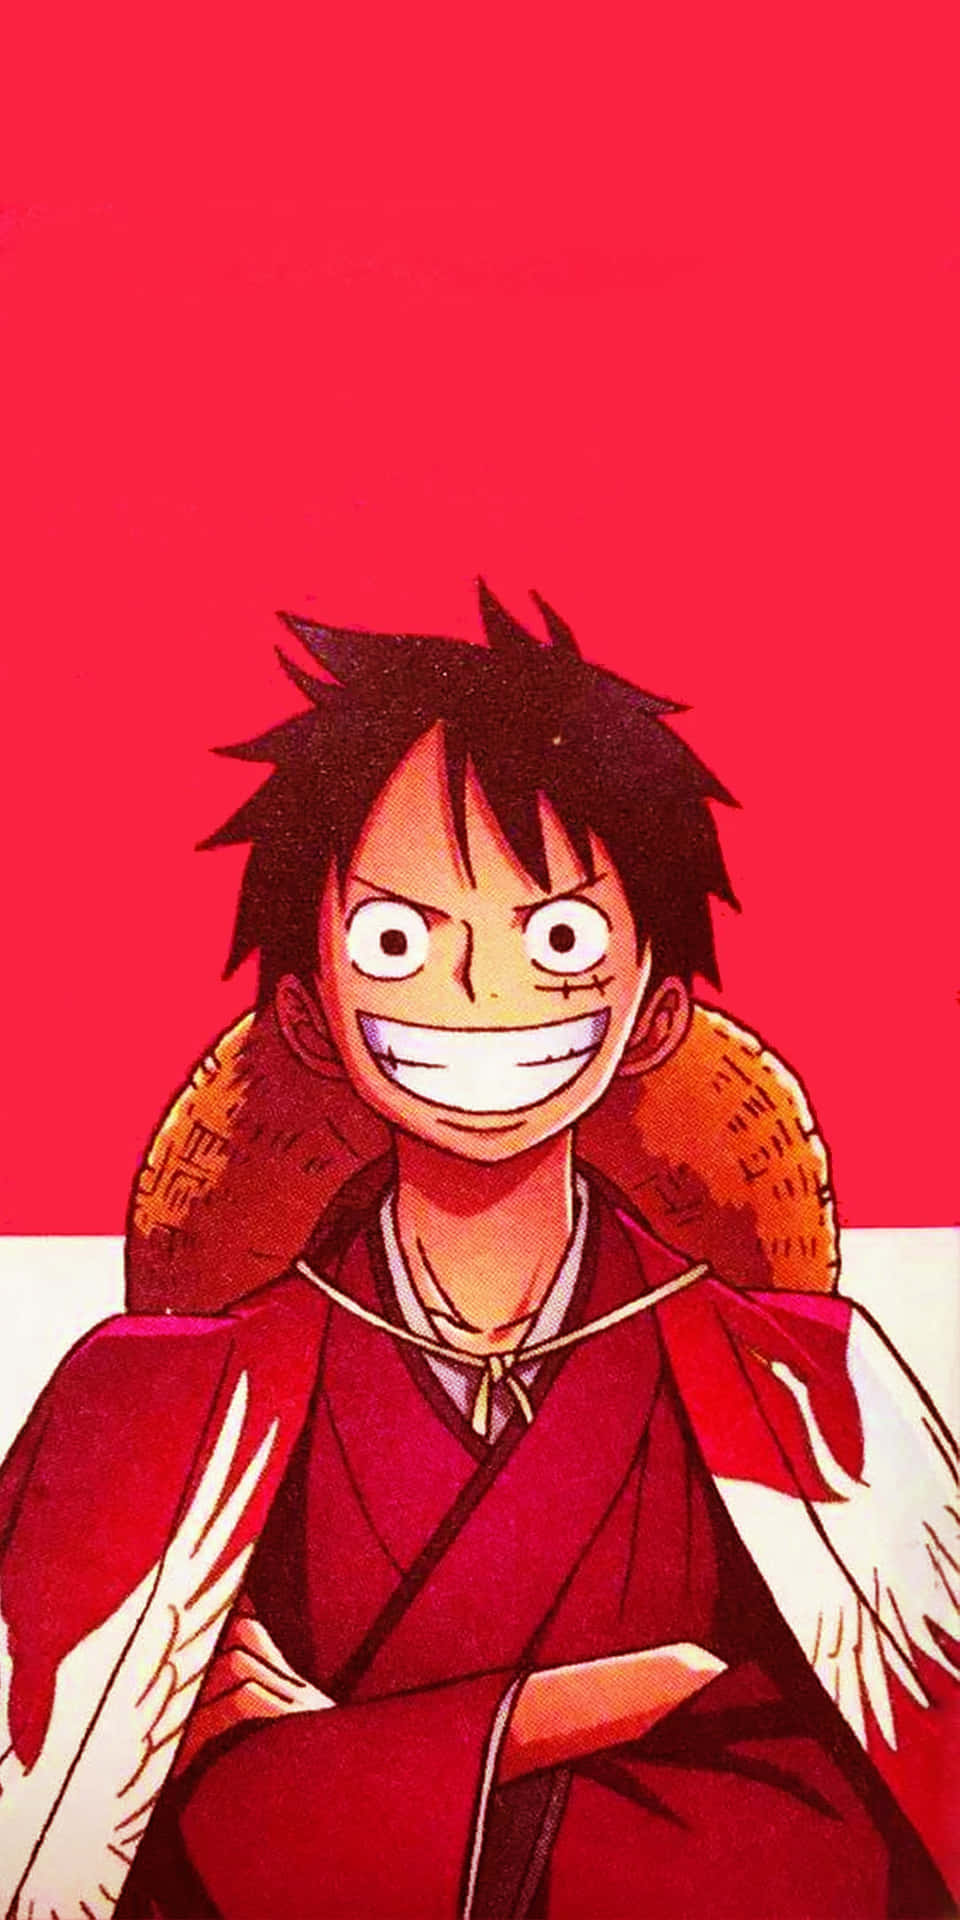 Luffy, the swashbuckling pirate!